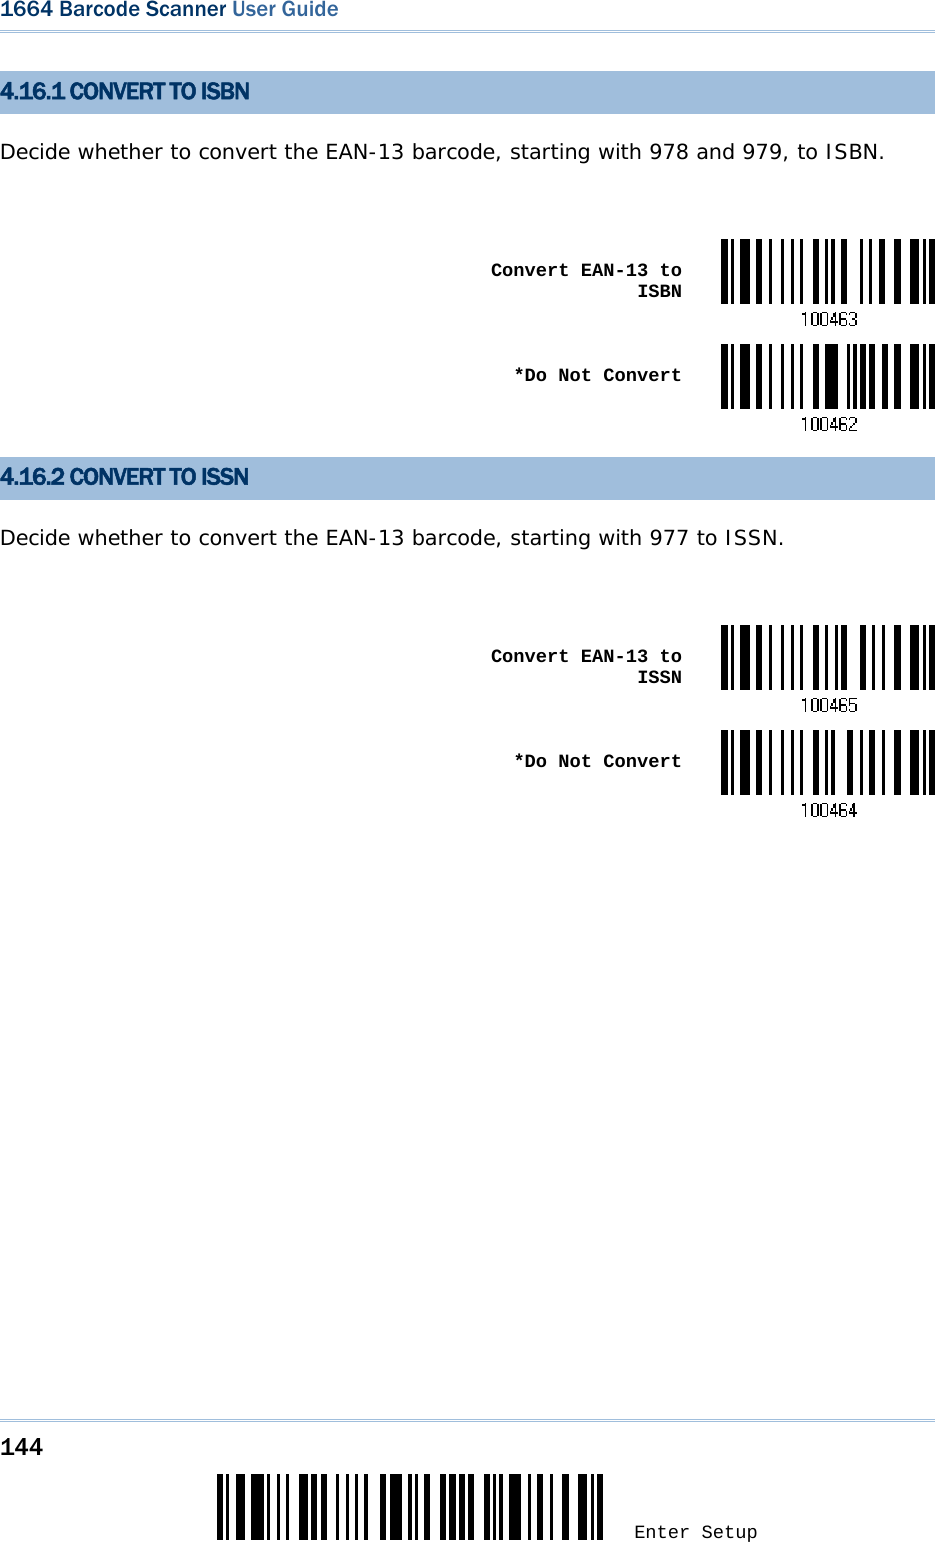 144 Enter Setup 1664 Barcode Scanner User Guide  4.16.1 CONVERT TO ISBN Decide whether to convert the EAN-13 barcode, starting with 978 and 979, to ISBN.   Convert EAN-13 to ISBN *Do Not Convert4.16.2 CONVERT TO ISSN Decide whether to convert the EAN-13 barcode, starting with 977 to ISSN.   Convert EAN-13 to ISSN *Do Not Convert                